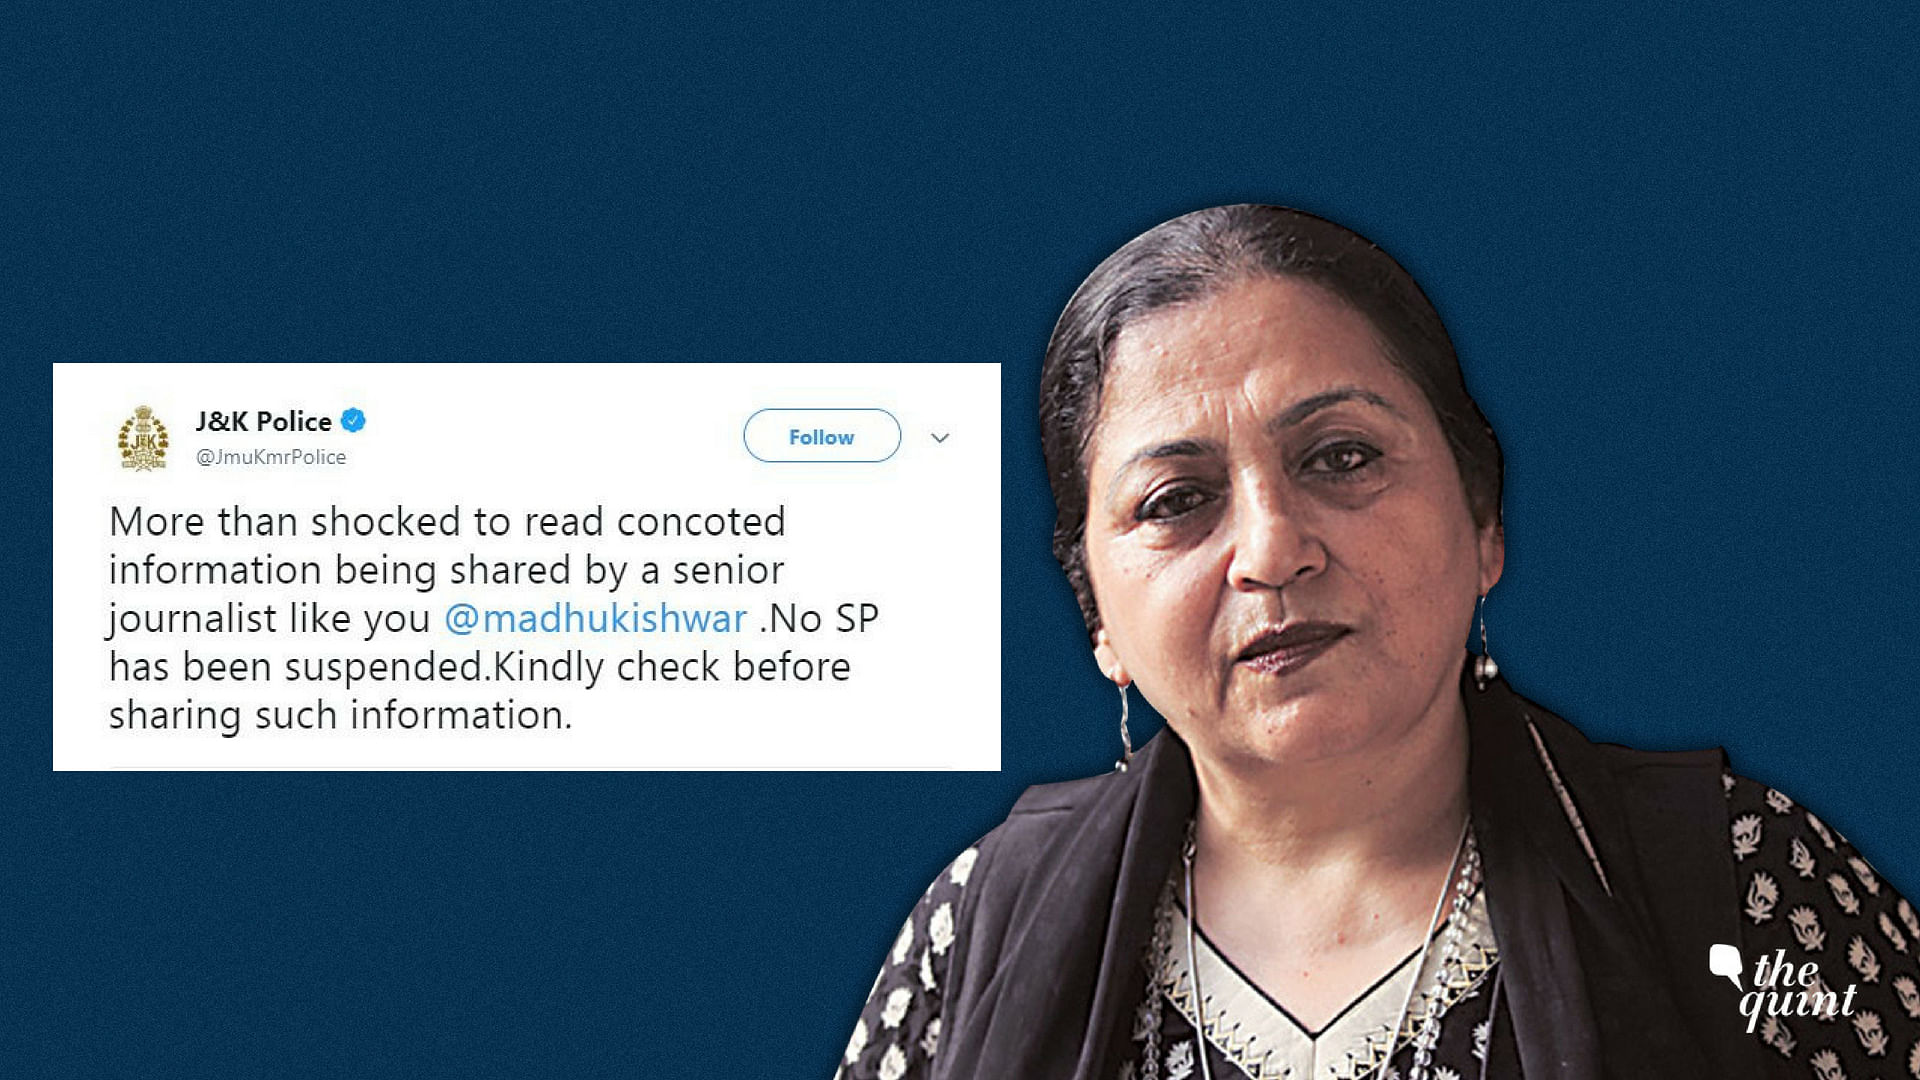 Jammu and Kashmir police has said that the information that Madhu Kishwar shared was “concocted.”